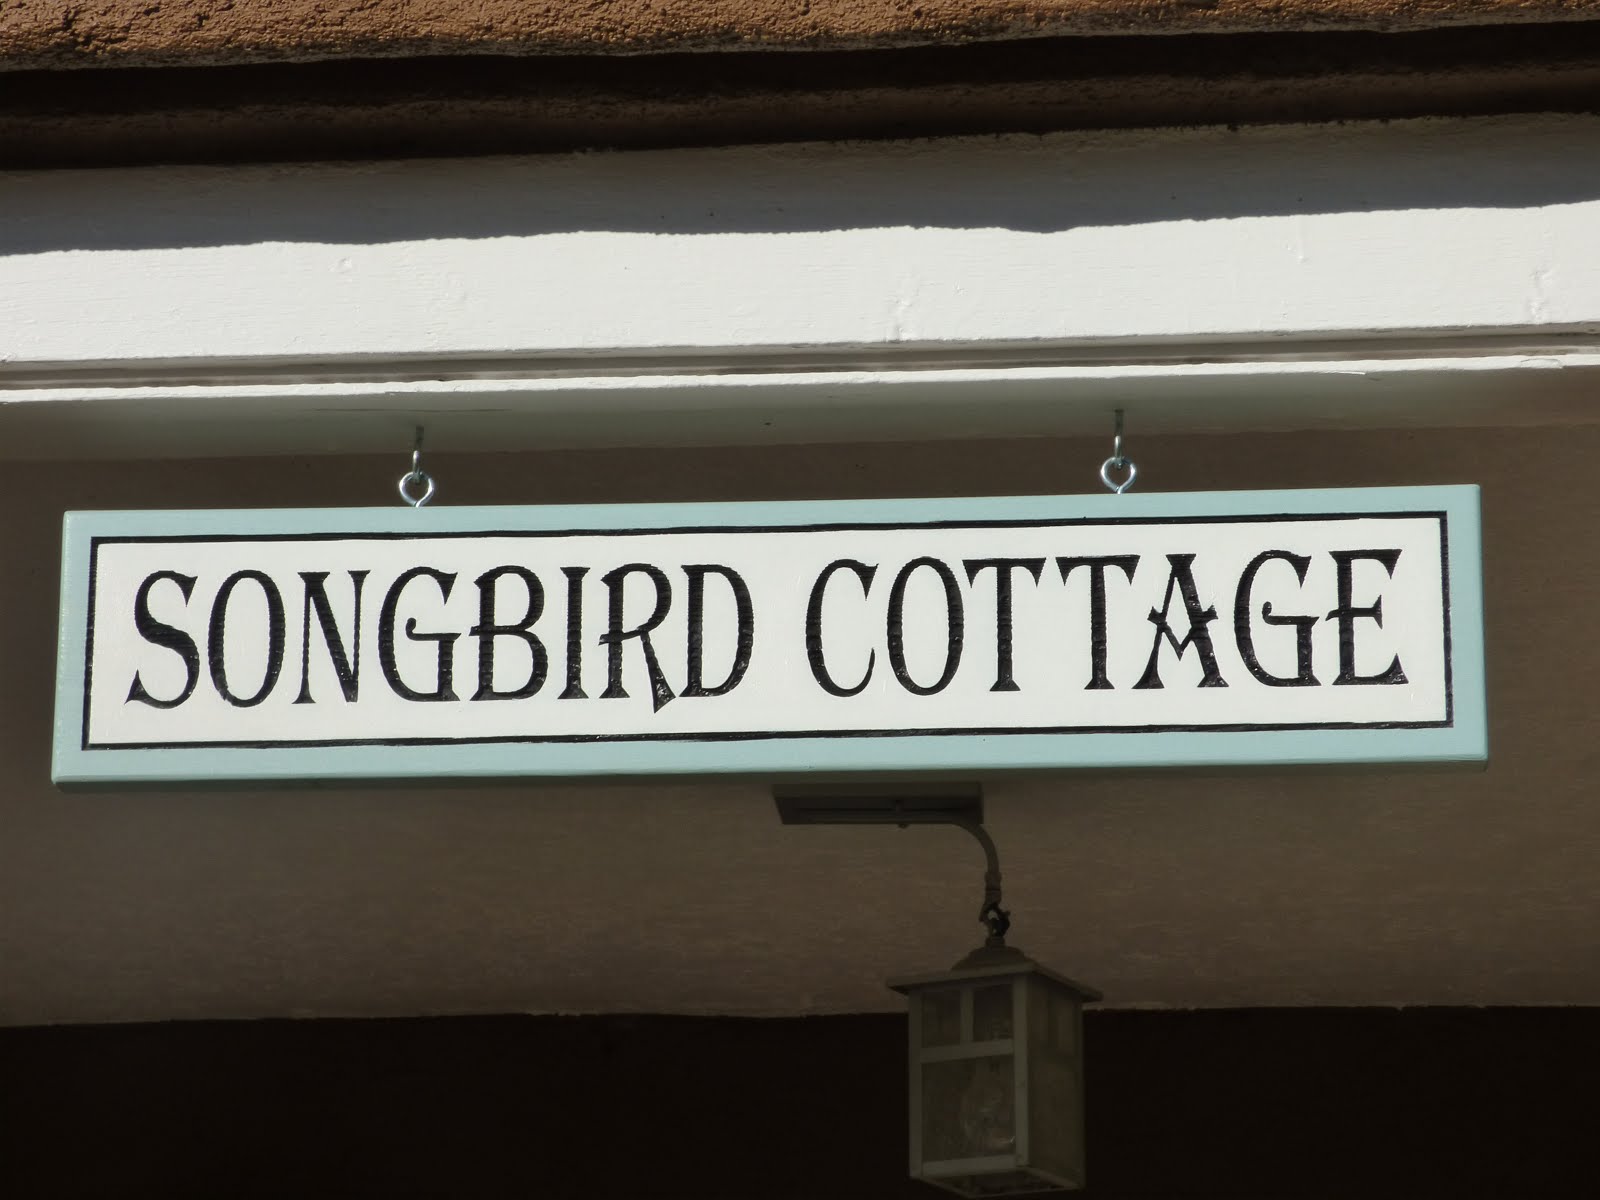 OUR ST. GEORGE "SONGBIRD COTTAGE" HOME 